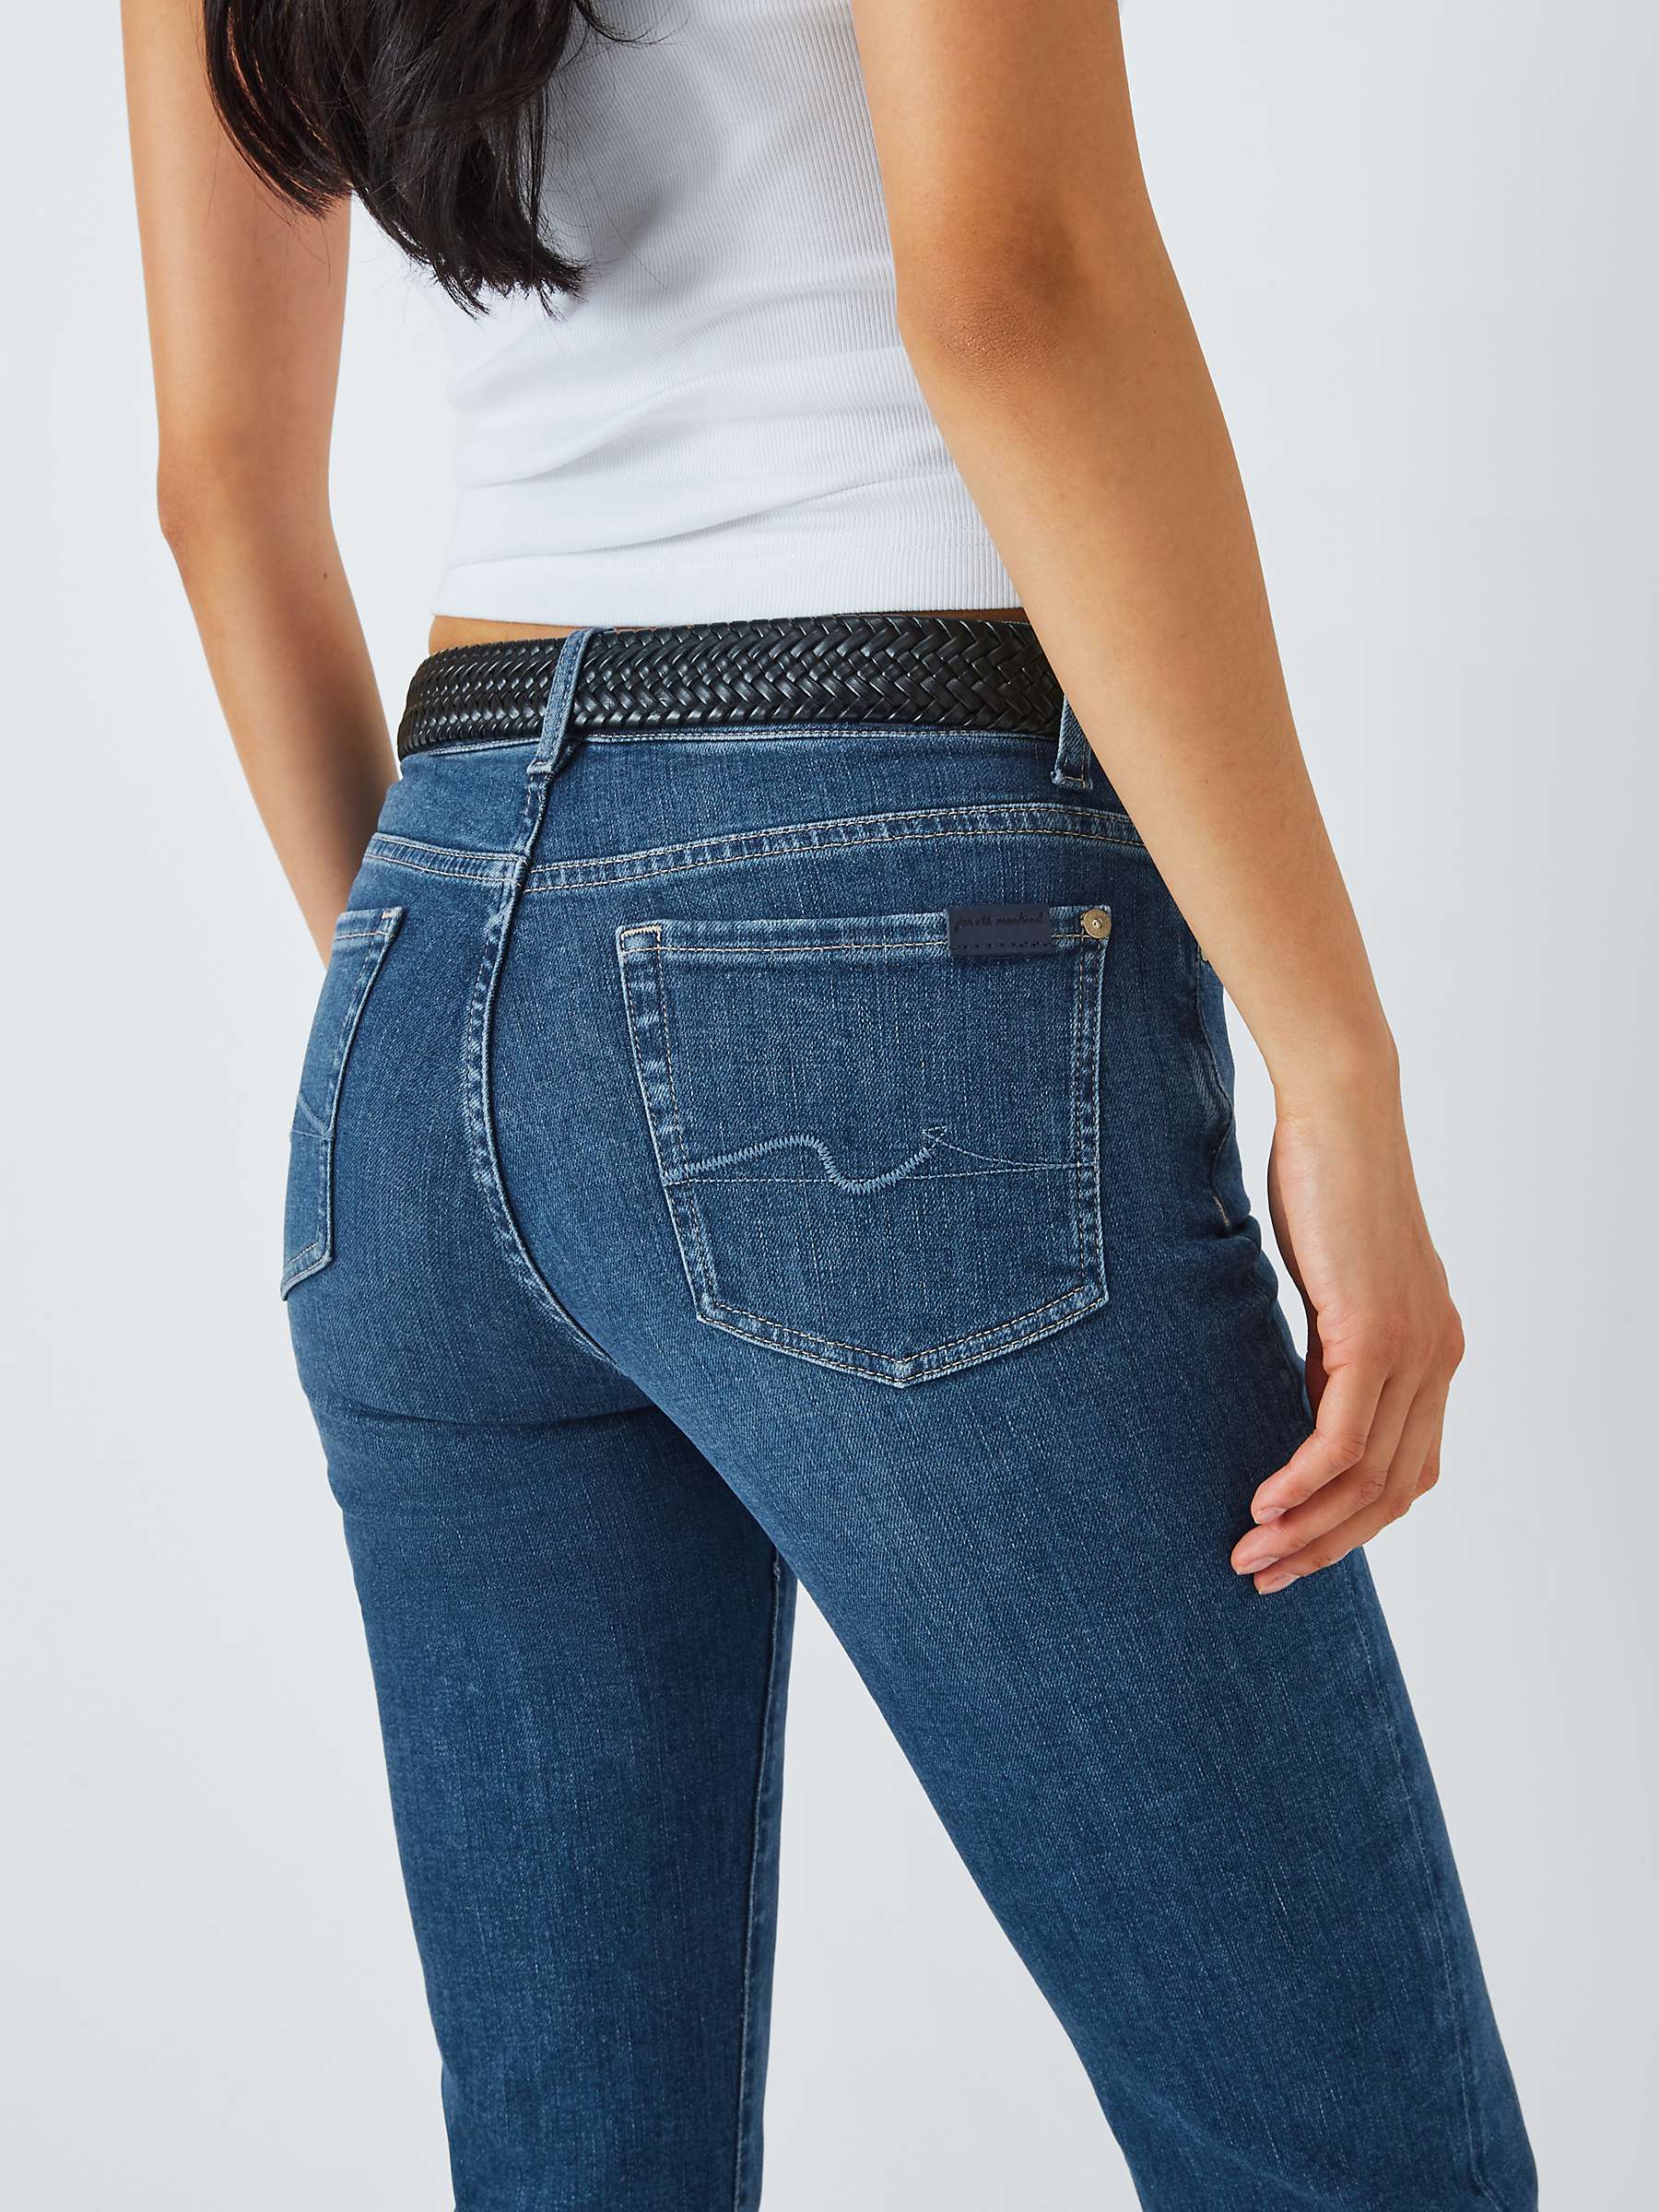 Buy 7 For All Mankind The Straight Cropped Jeans, Slim Illusion Saturday Online at johnlewis.com